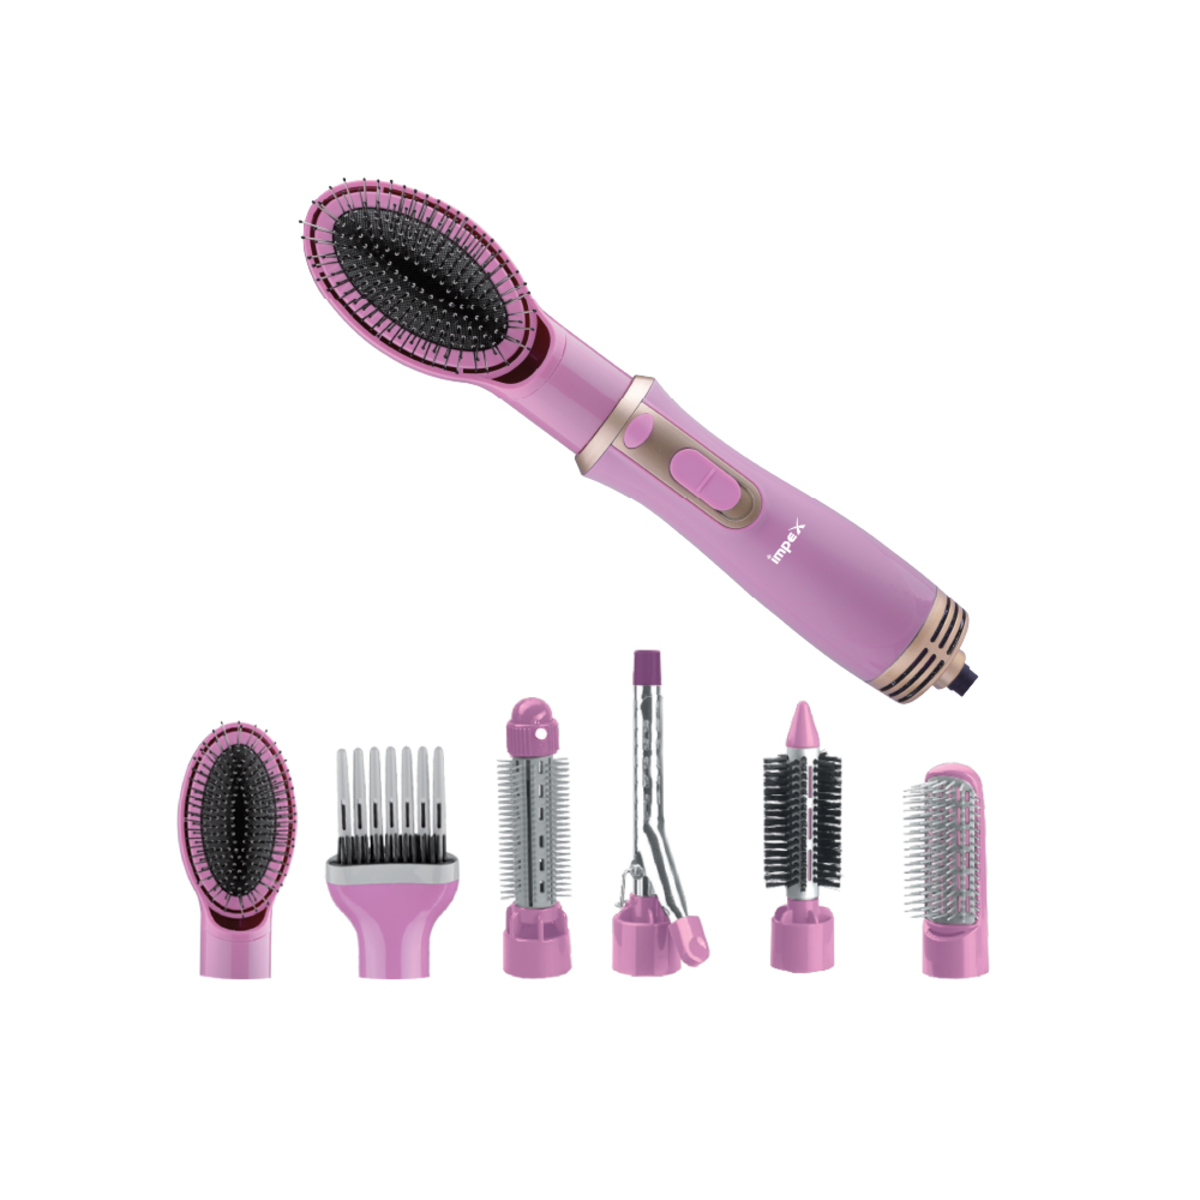 Impex HS 304 800W Hair Styler with 0-1-2 Heats settings